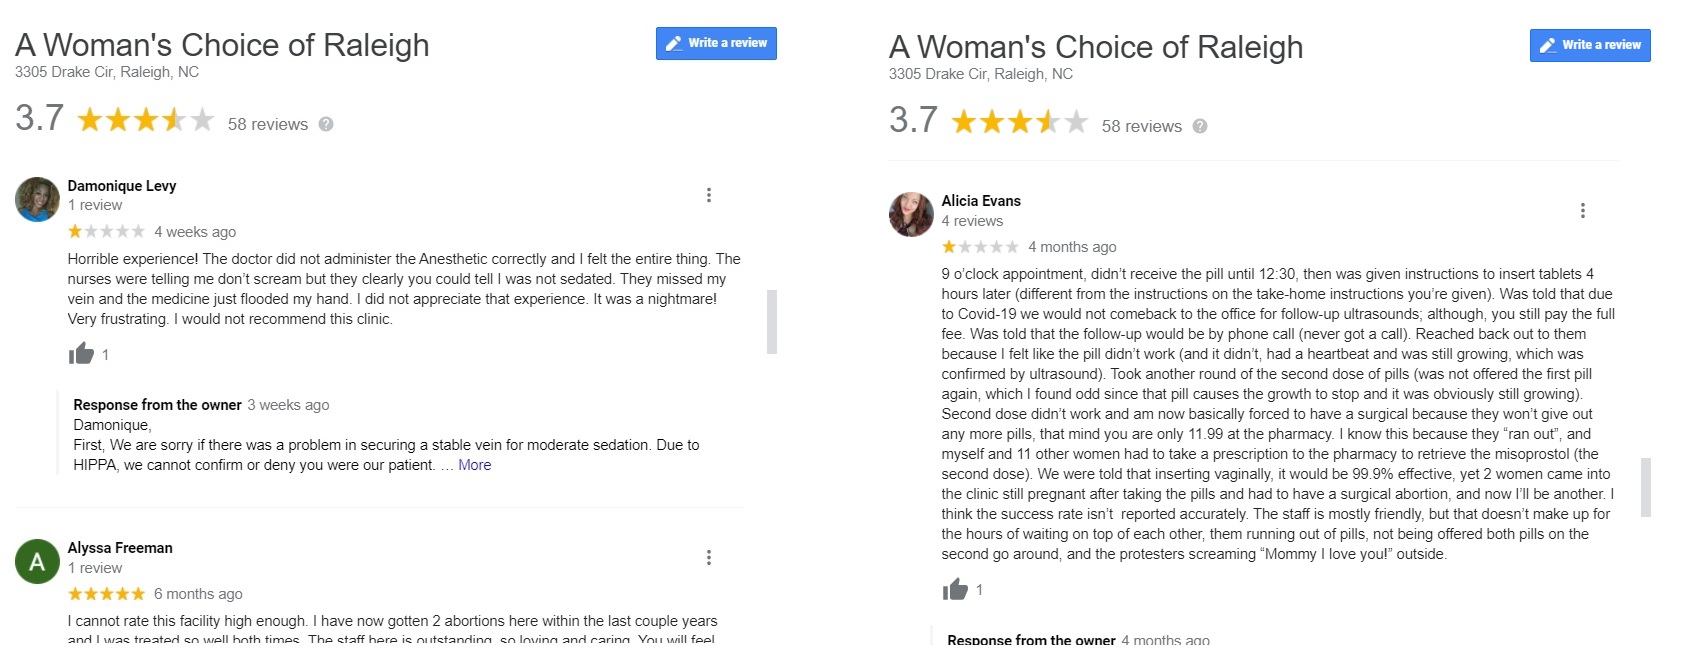 Image: Raleigh abortion facility Google reviews Horrible experience and abortion pill did not work accessed 061721